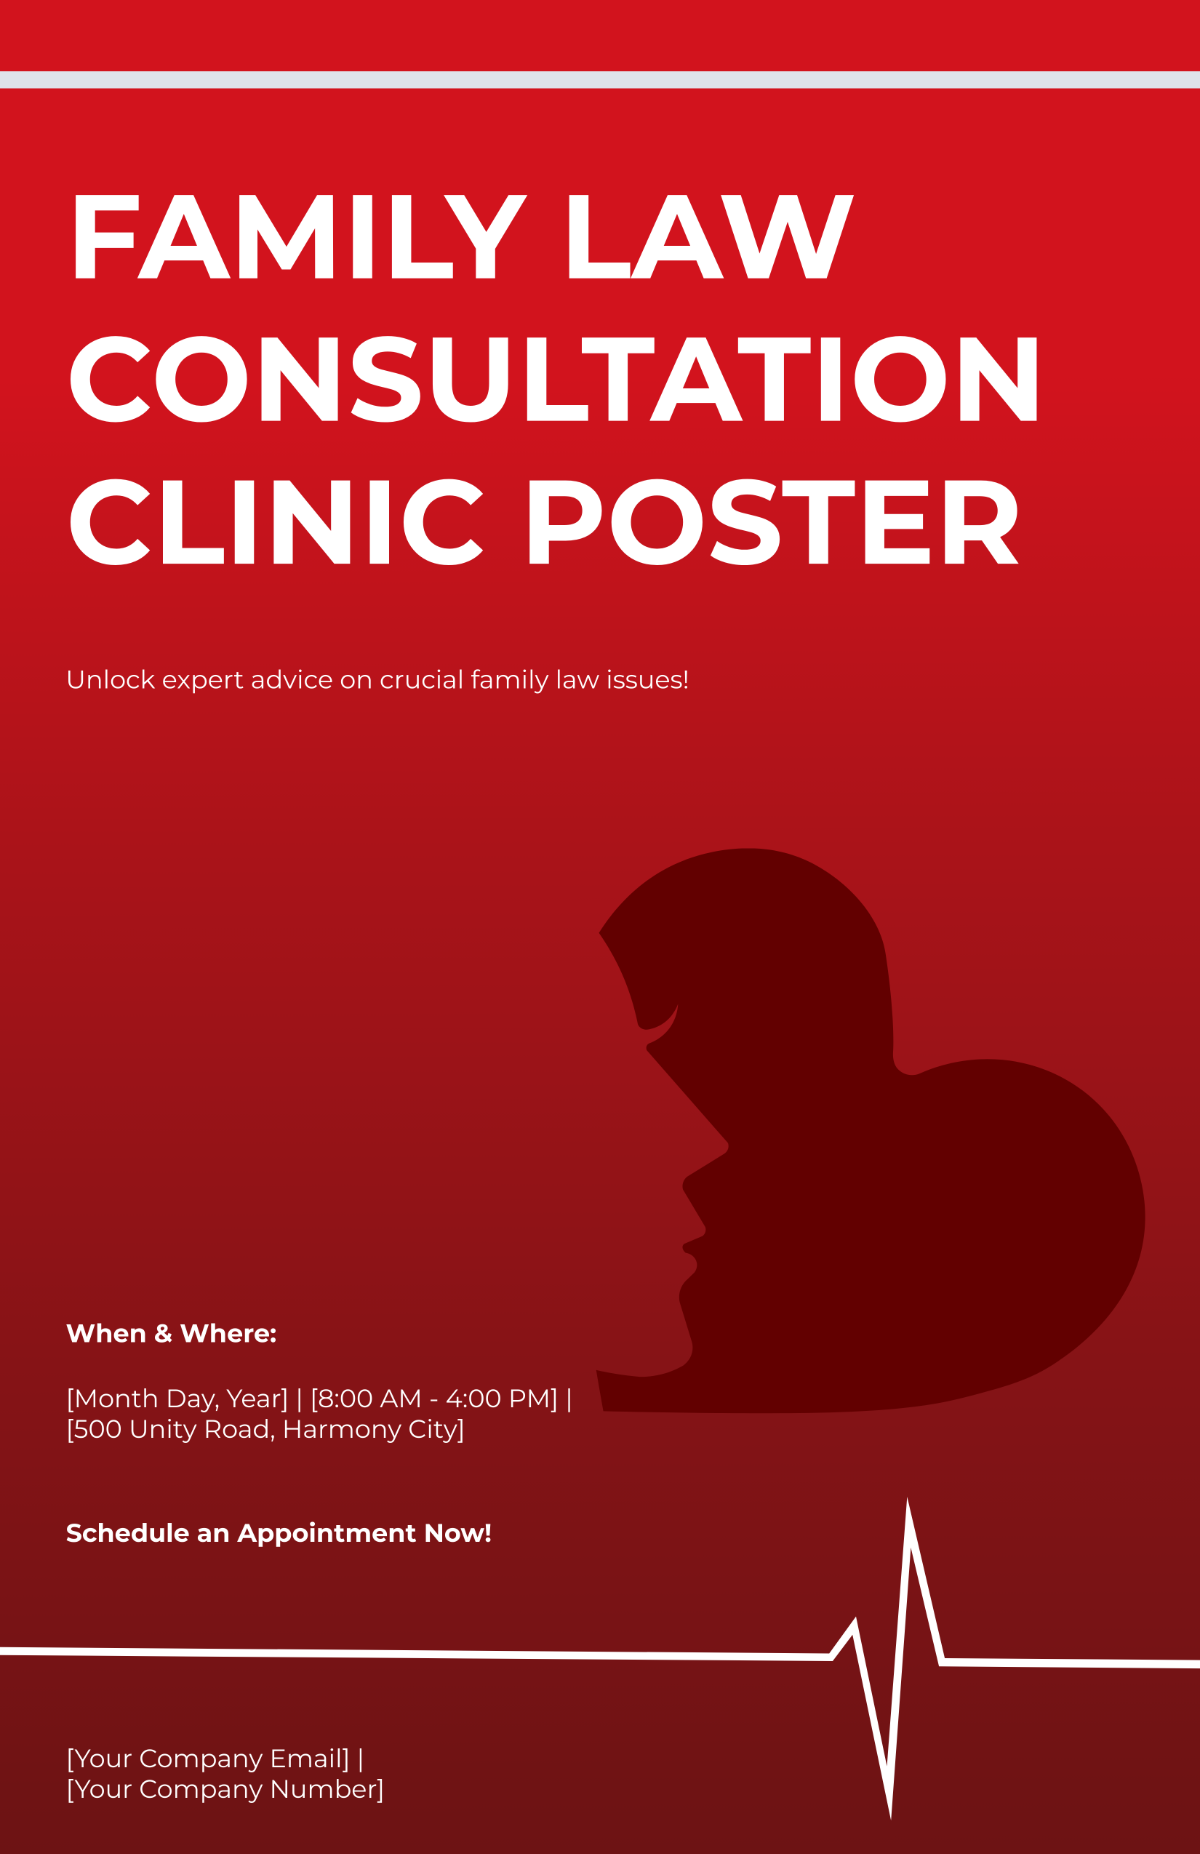 Family Law Consultation Clinic Poster Template